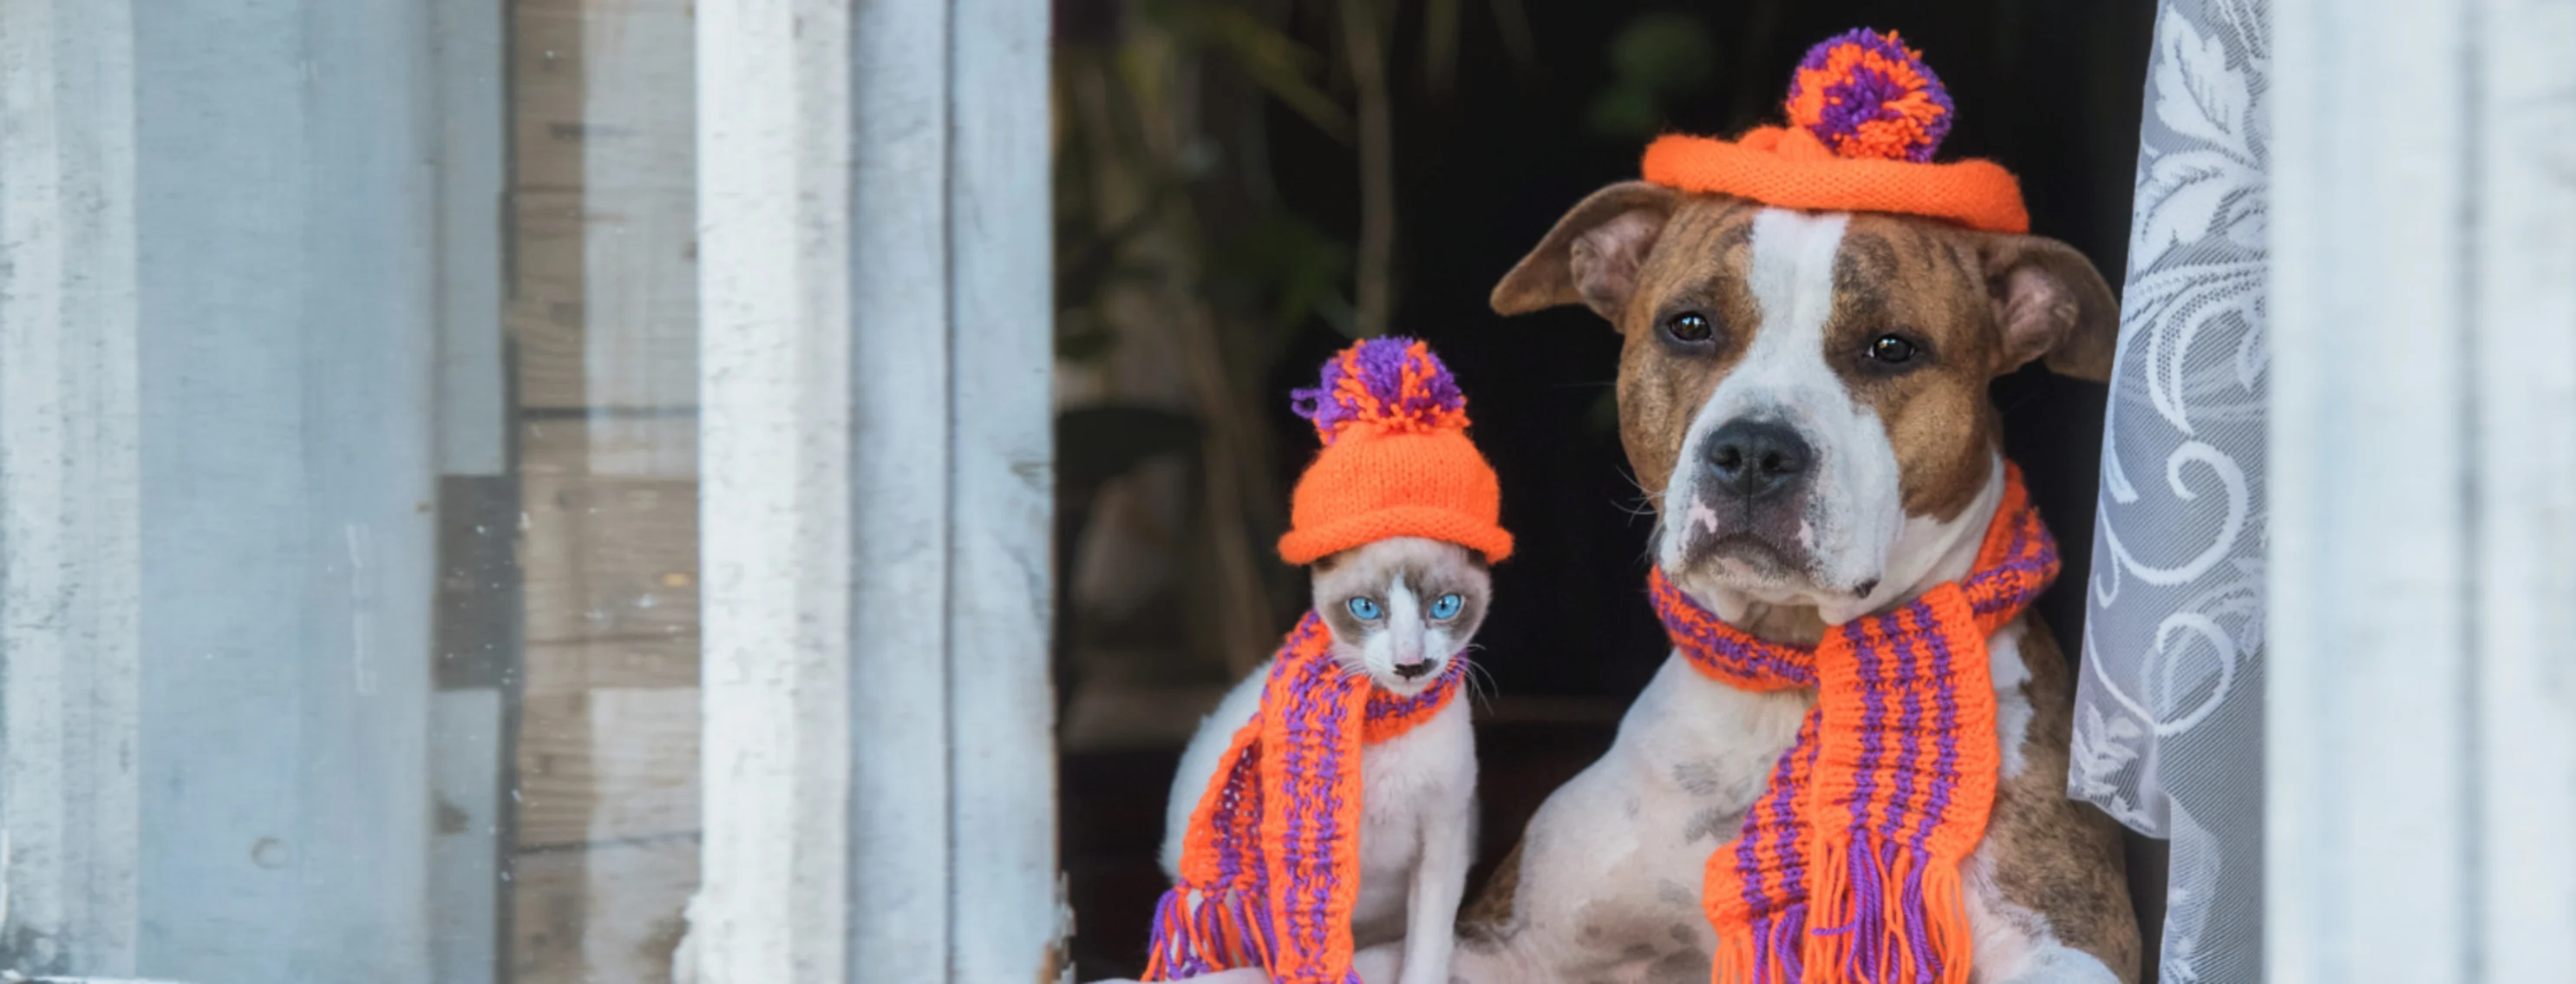 Cat and dog wearing colorful scarves and beanies